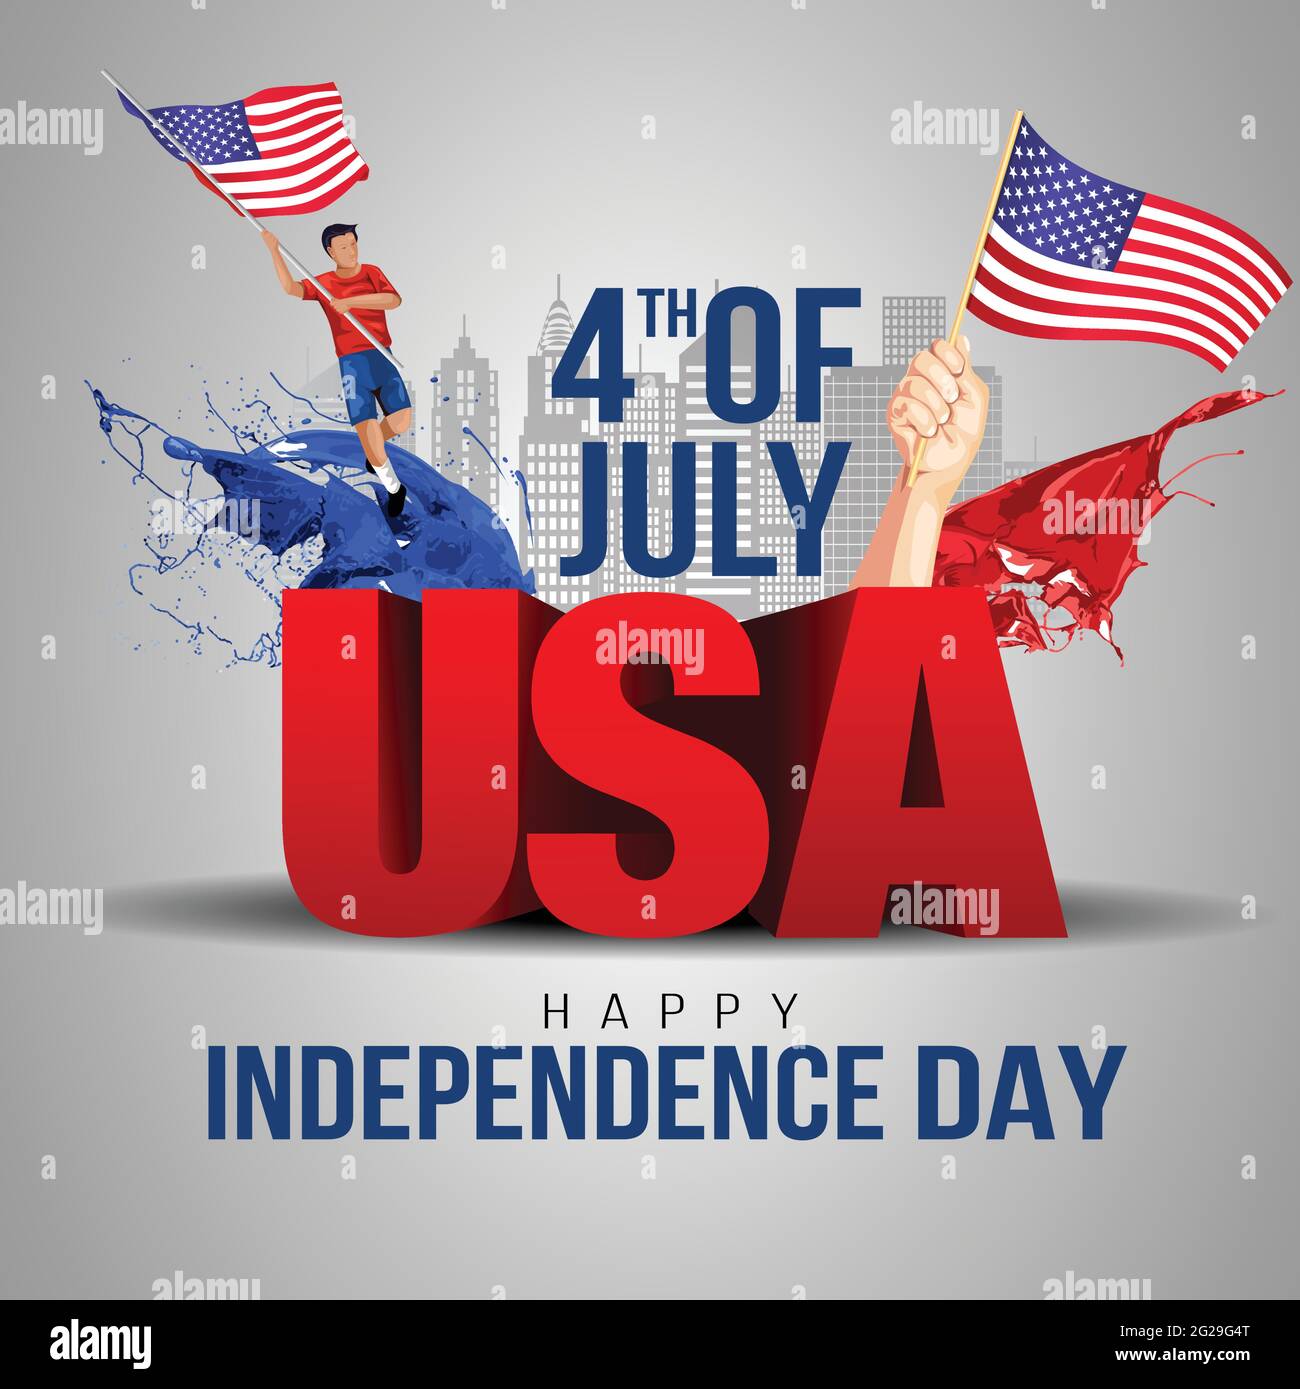 happy independence day america. vector illustration flag and 3d ...